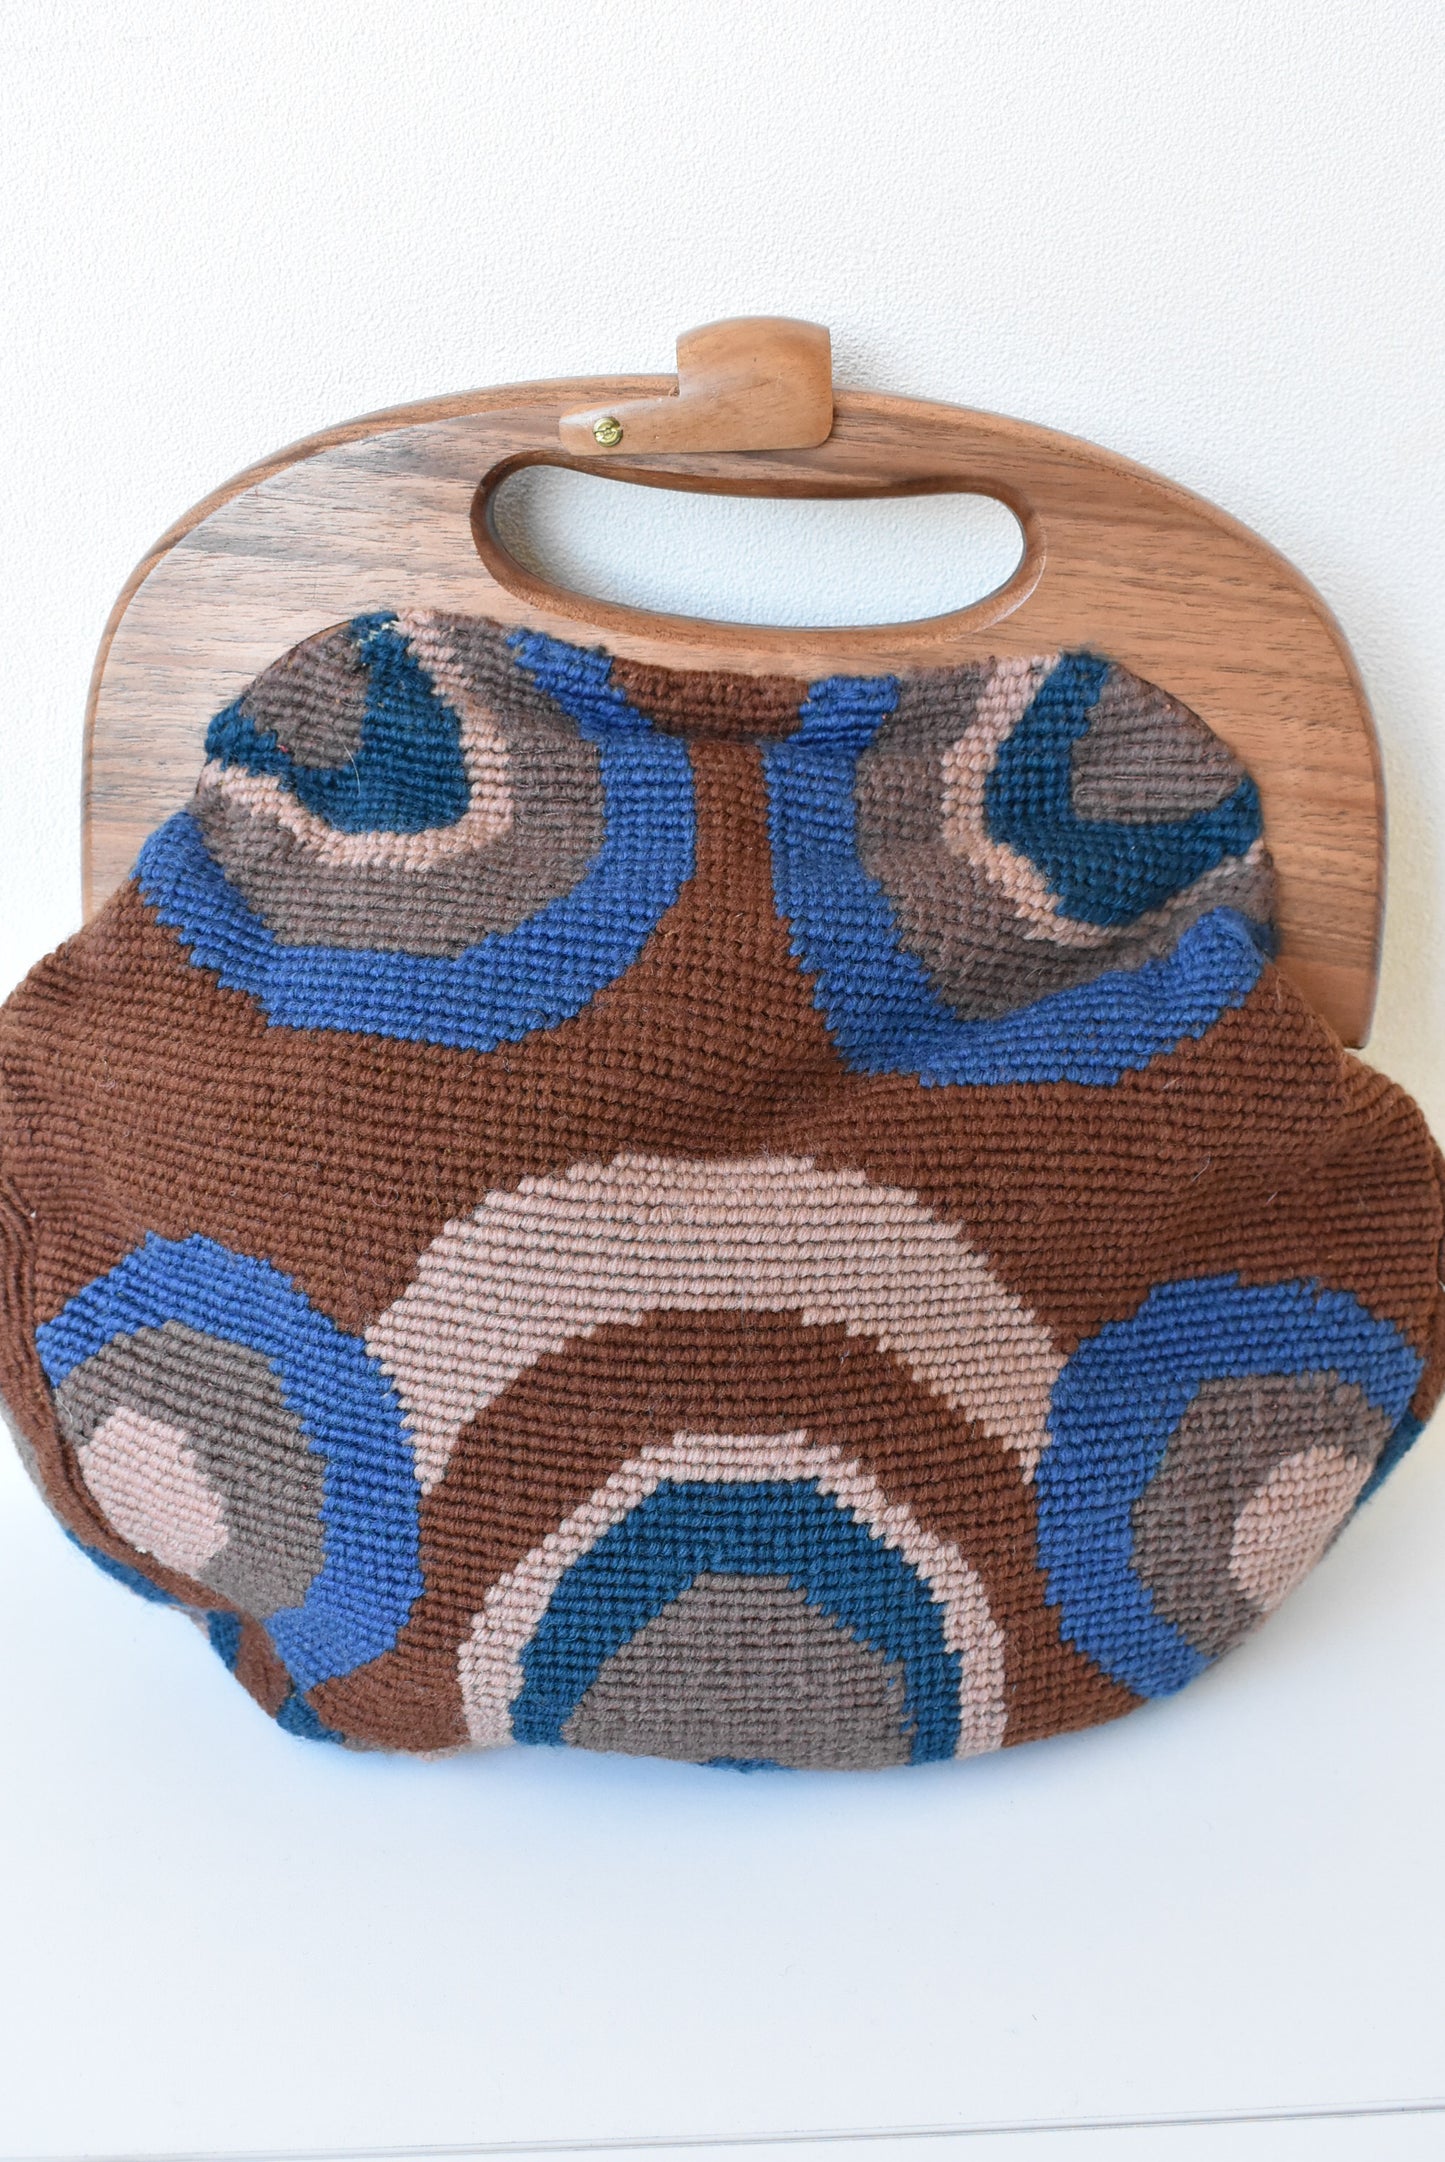 Vintage 1970s tapestry bag with wooden handles